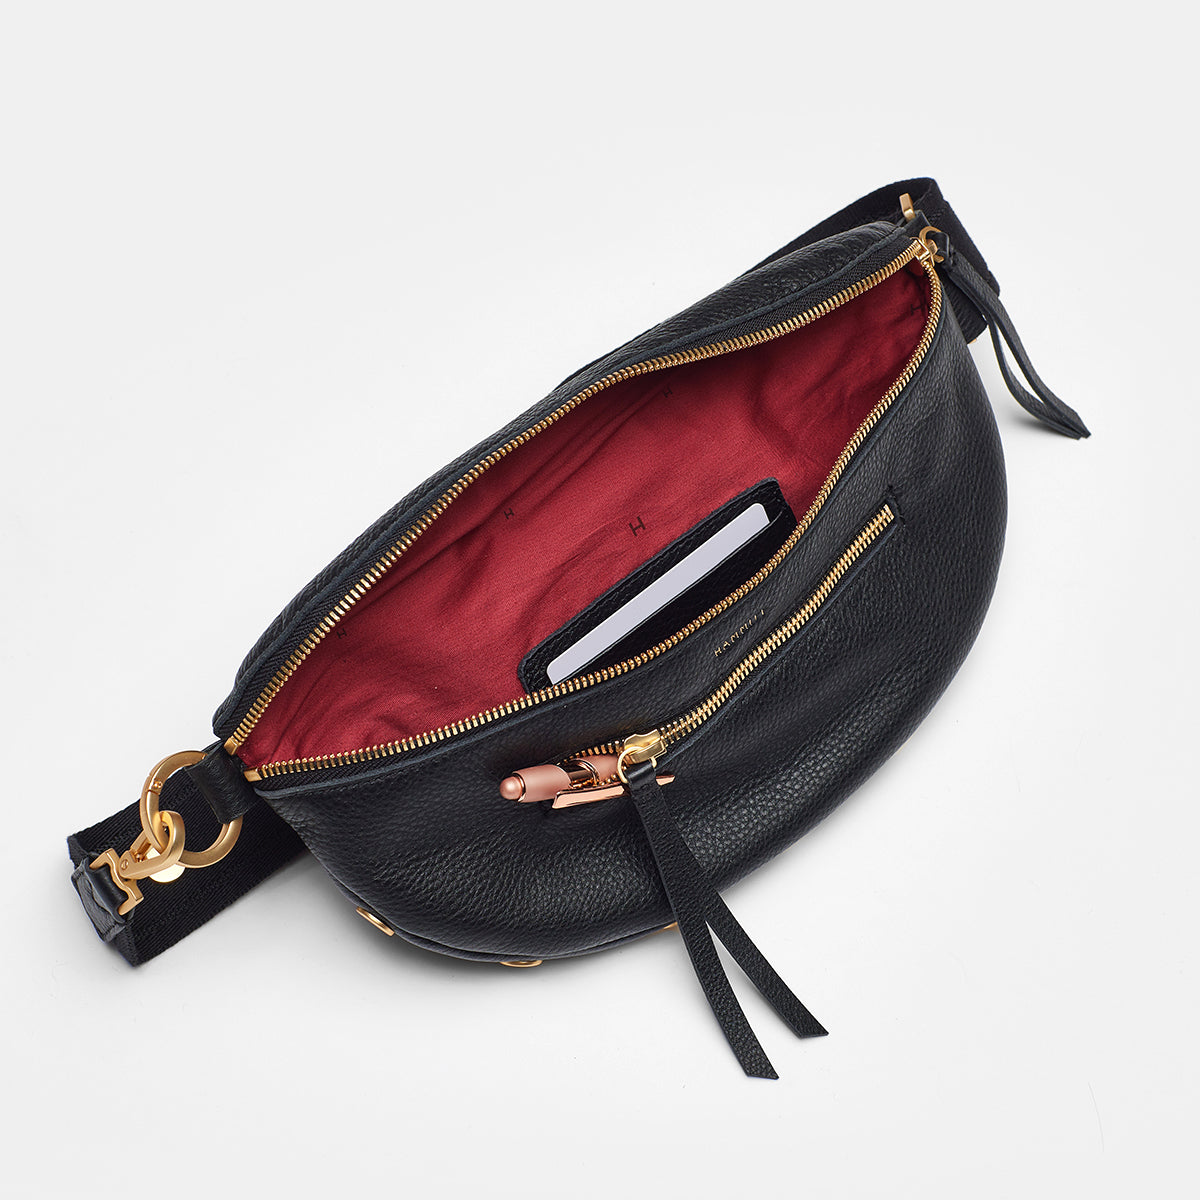 Charles-Crossbody-Revival-Collection-Inside-View